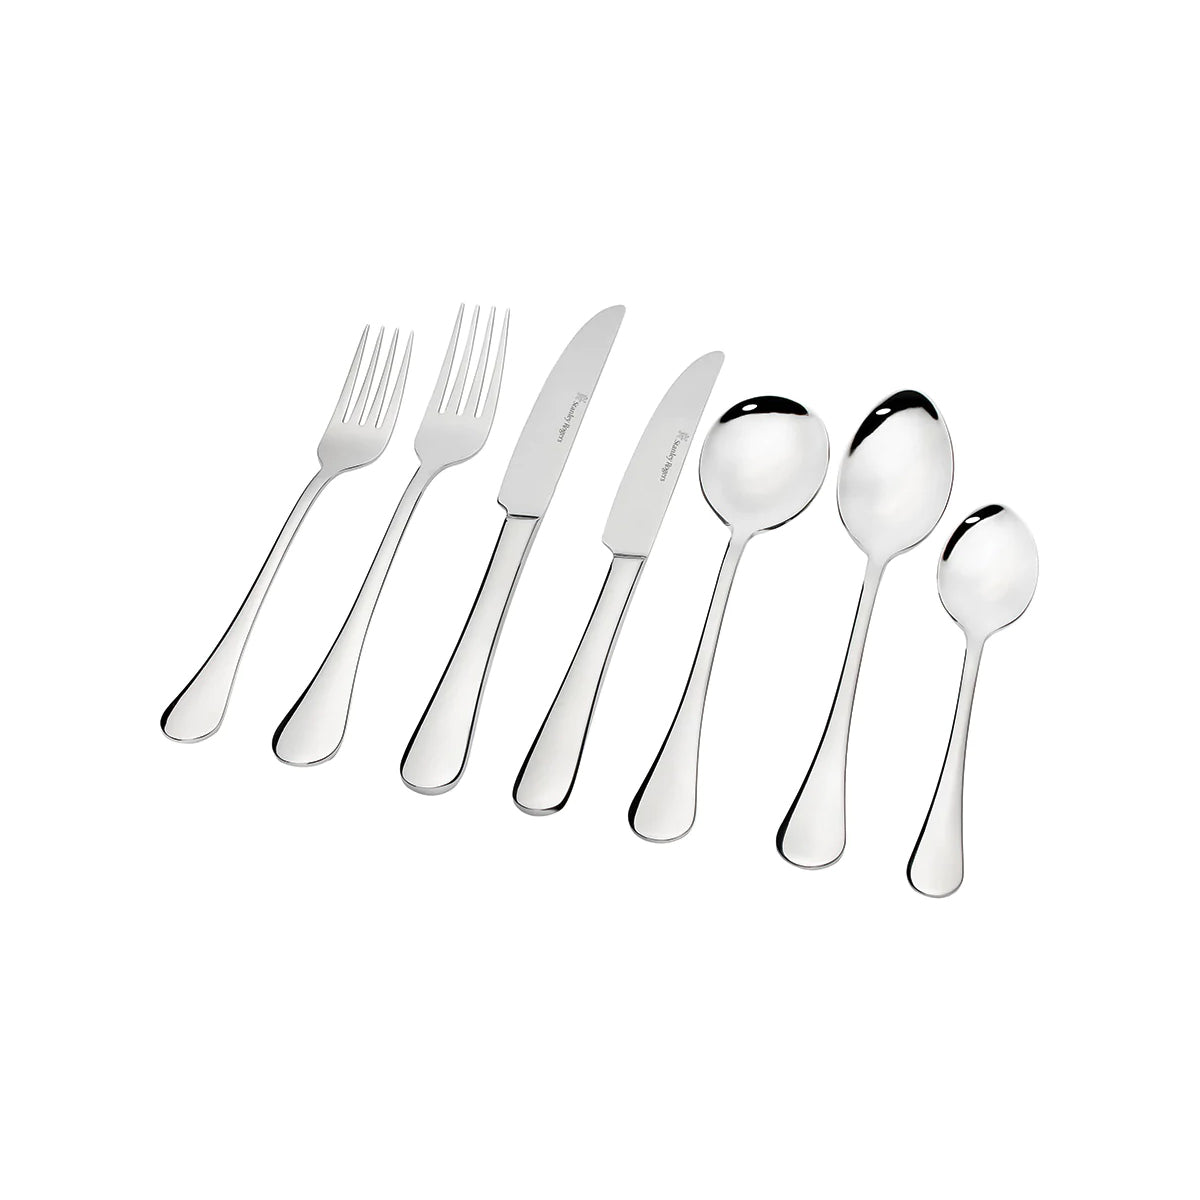 Manchester 56pc Cutlery Set